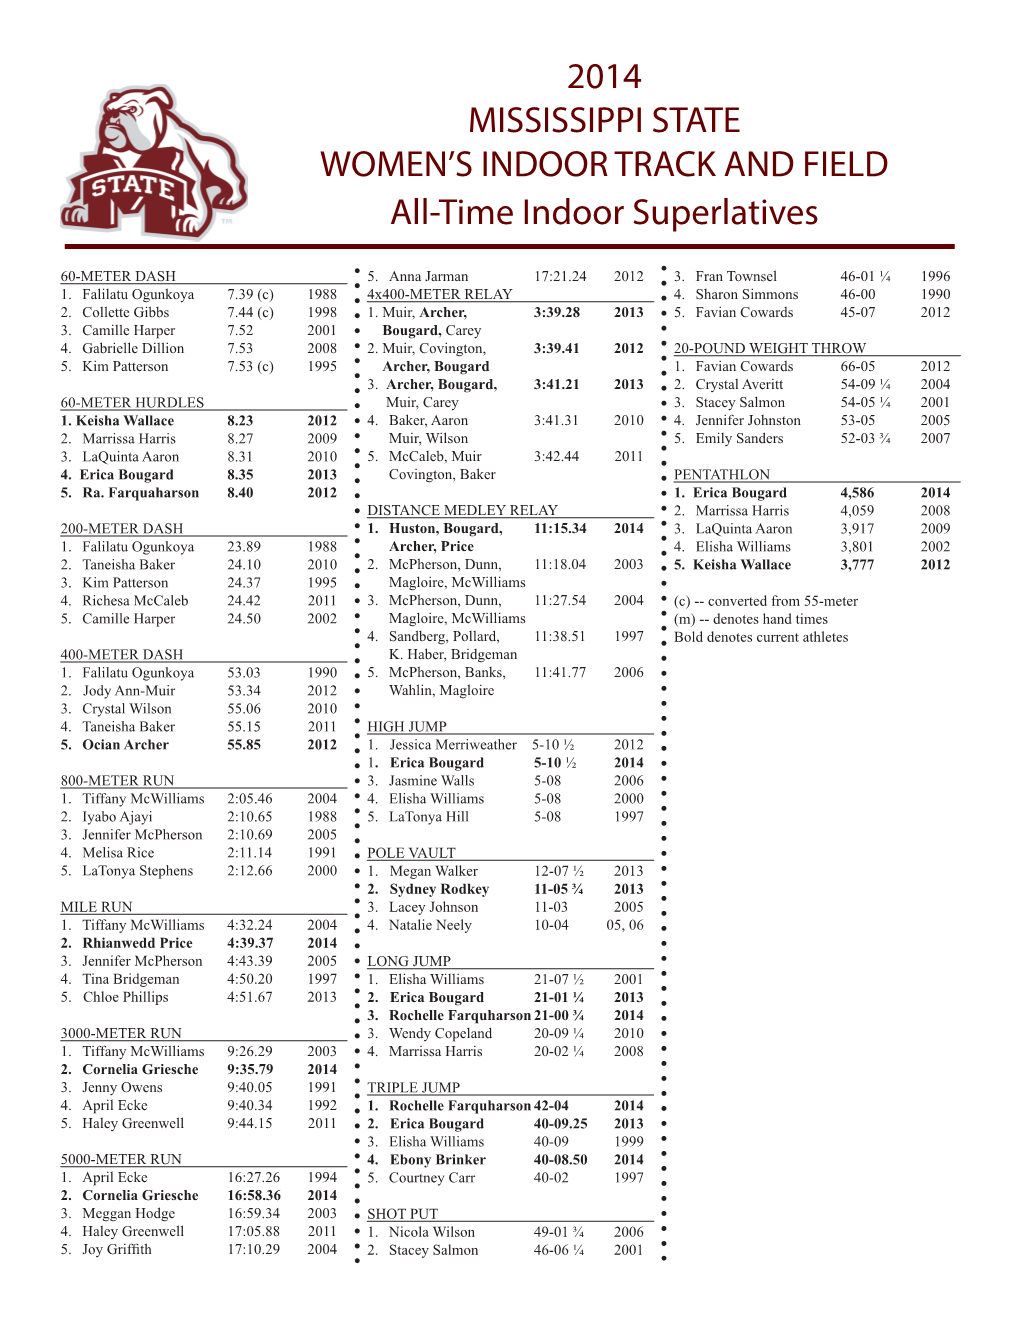 2014 MISSISSIPPI STATE WOMEN's INDOOR TRACK and FIELD All